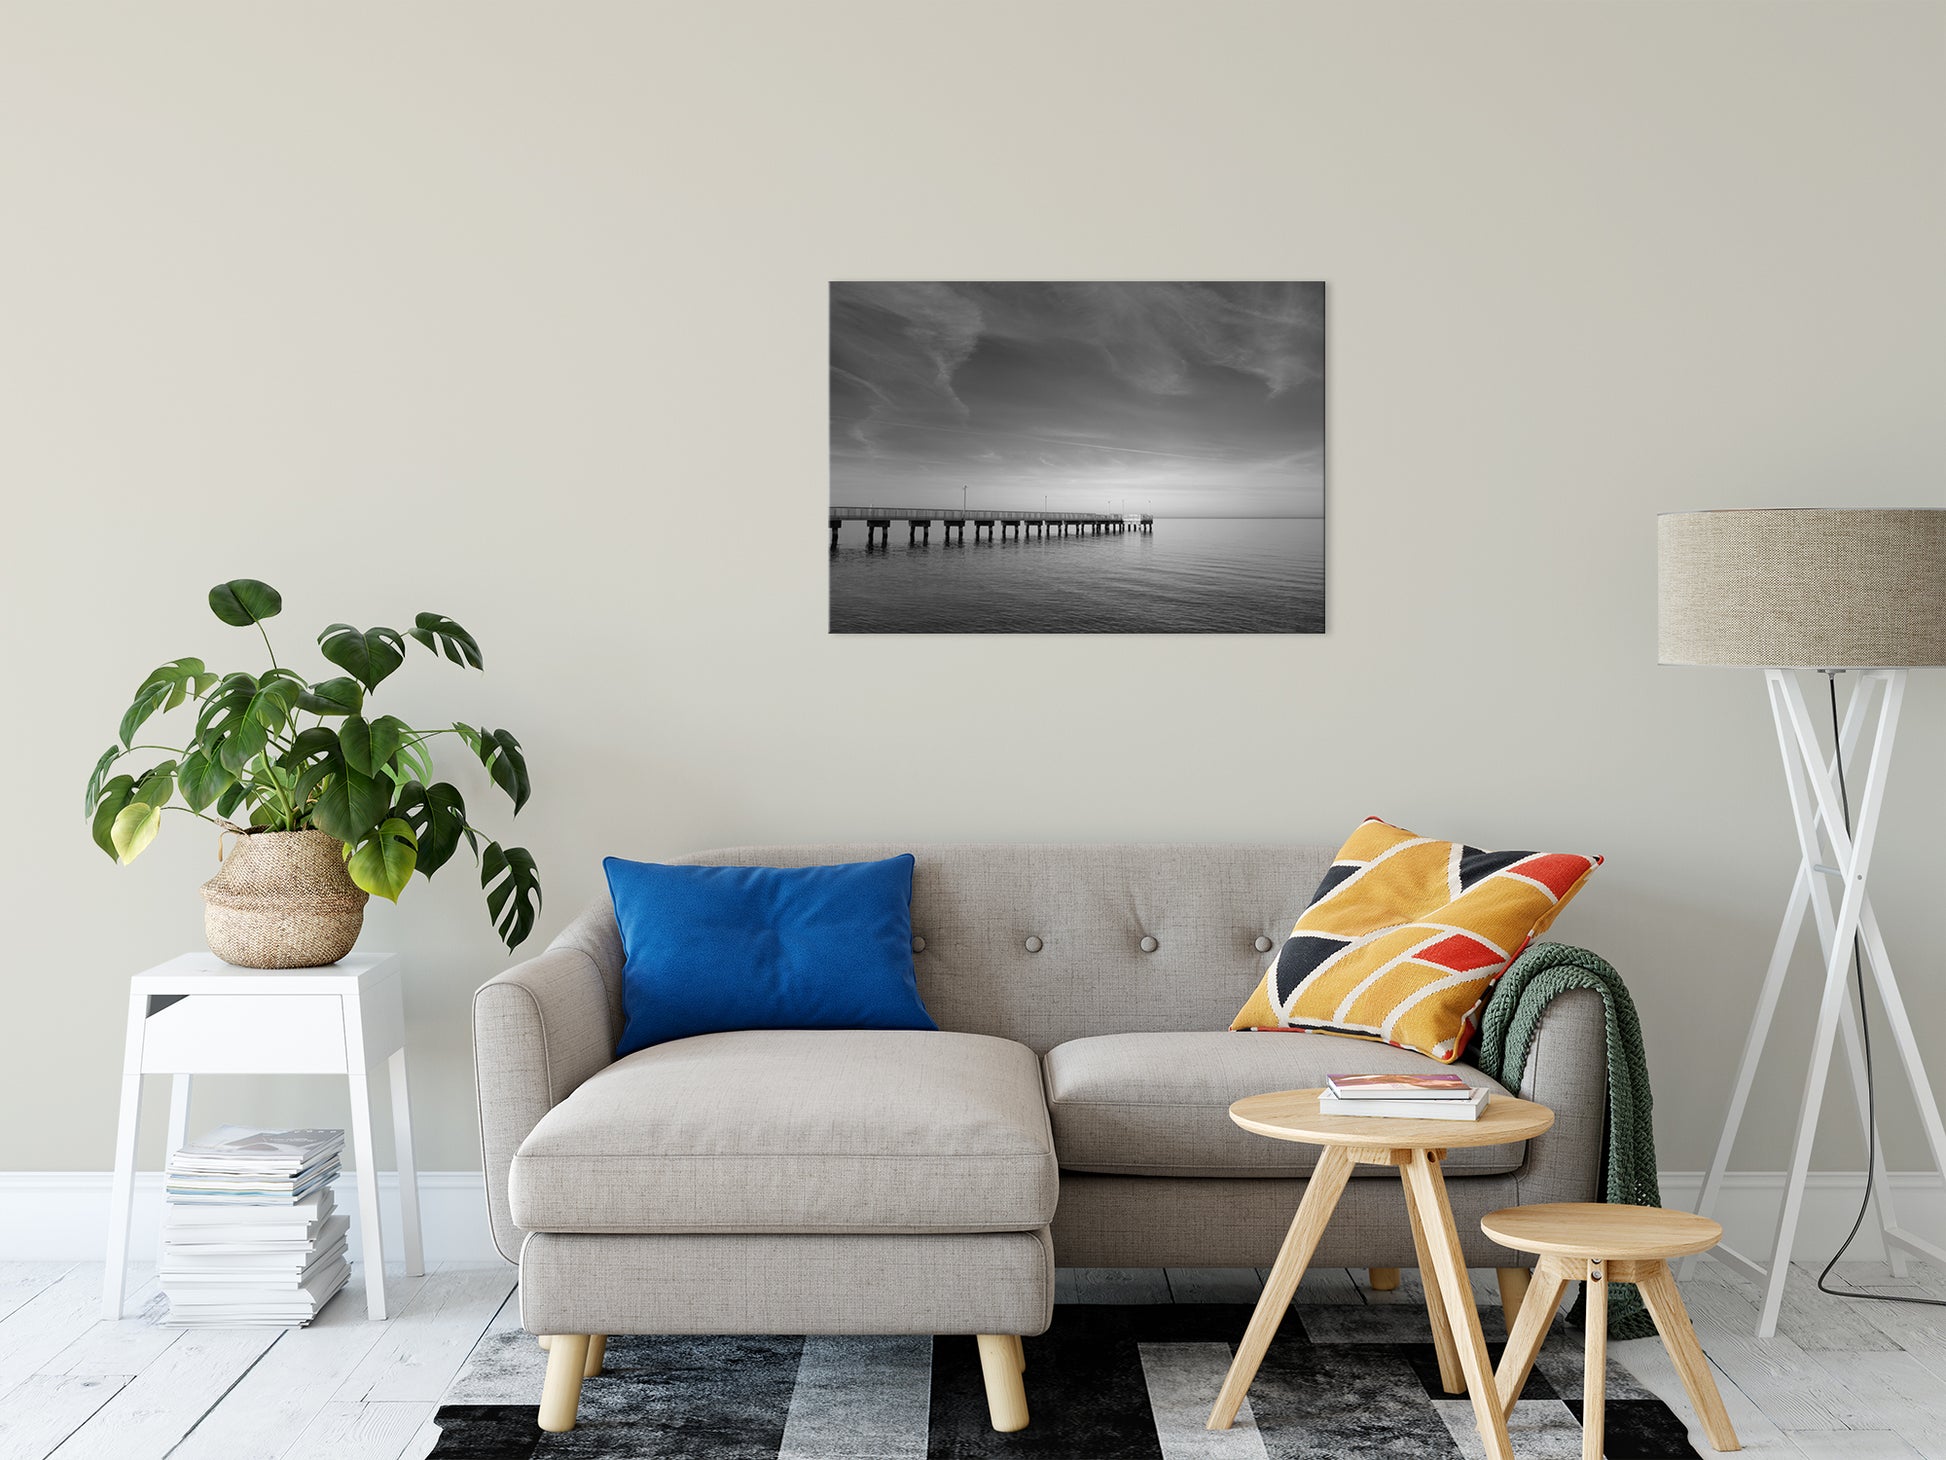 End of the Pier Black and White Coastal Landscape Fine Art Canvas Wall Art Prints 24" x 36" - PIPAFINEART